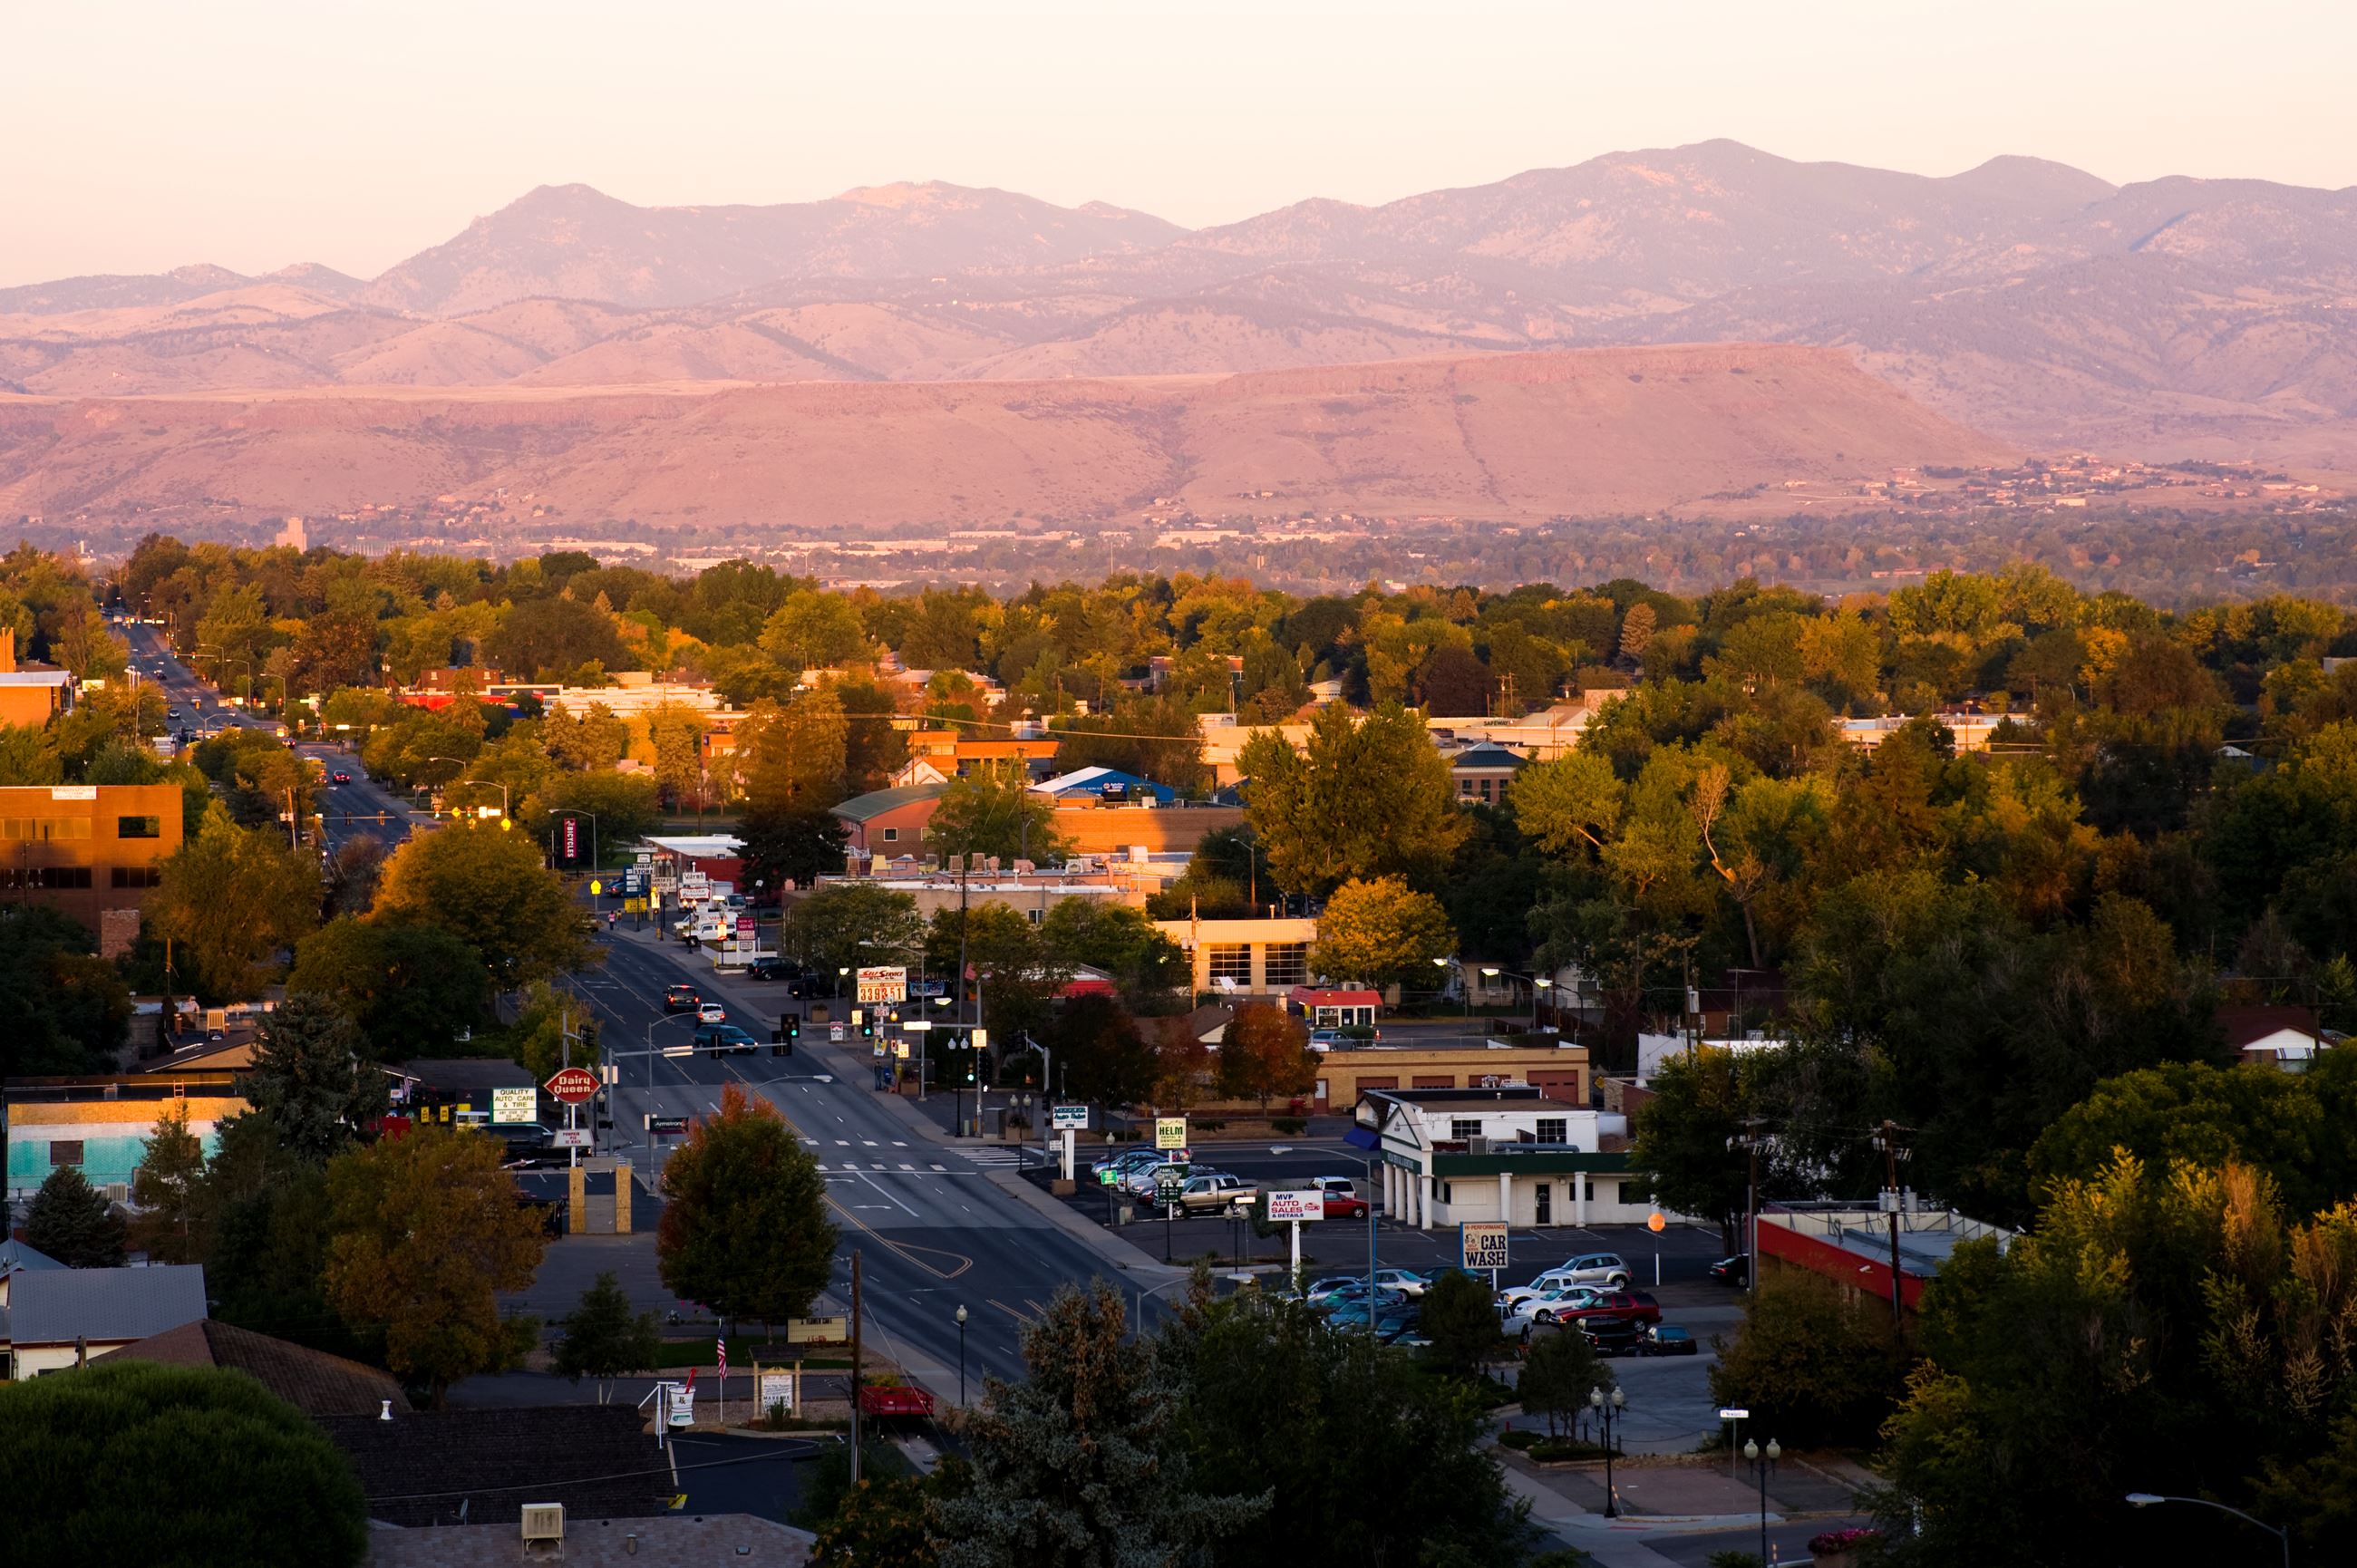 City of Wheat Ridge View of the Mountains